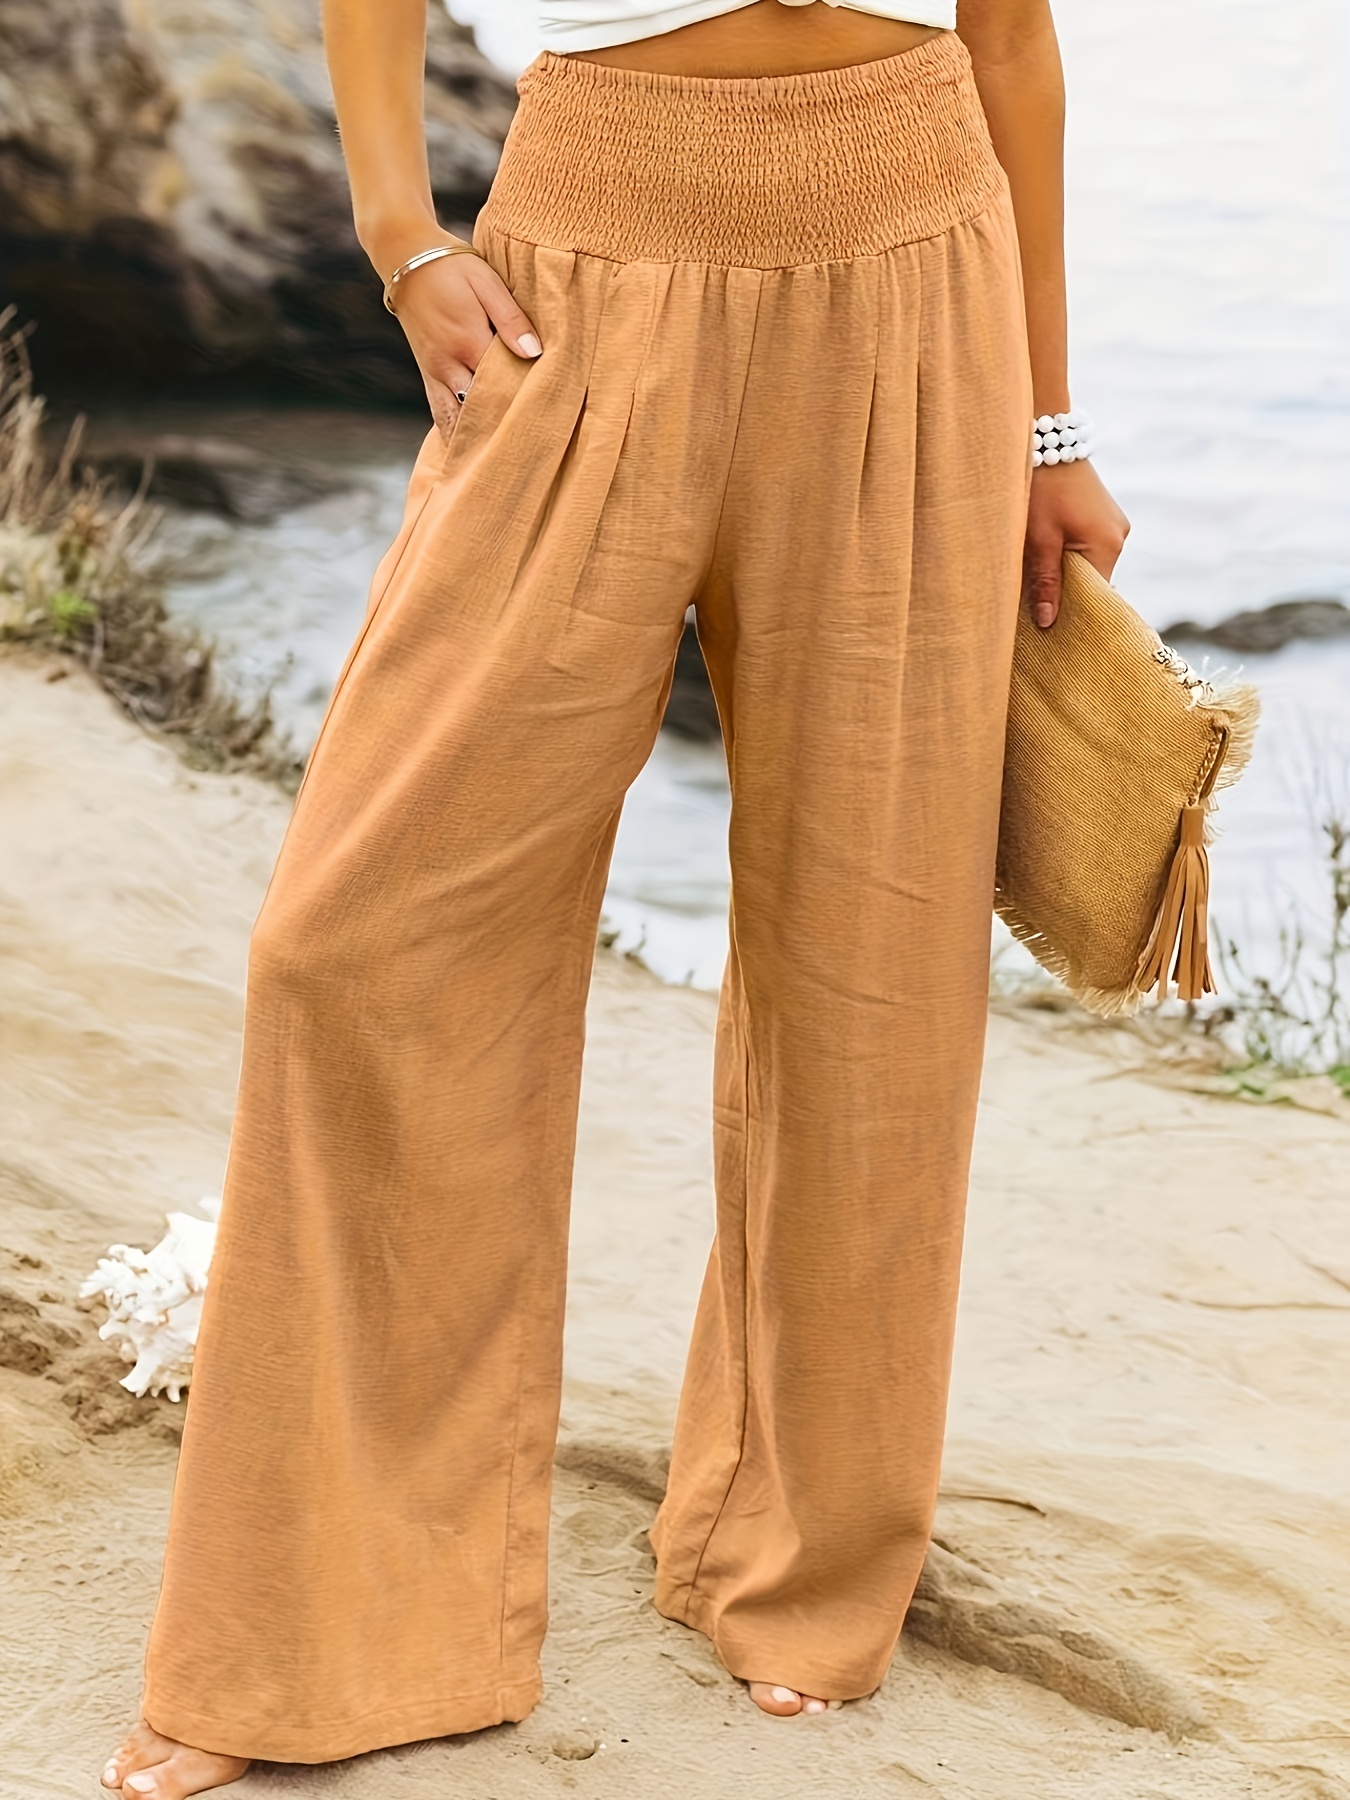 Korean Style Chic Pockets Wide Leg Pants Button Loose Casual Spring Fall  High Waist Capris Womens Clothing Simple Fashion From Junxcj, $37.14